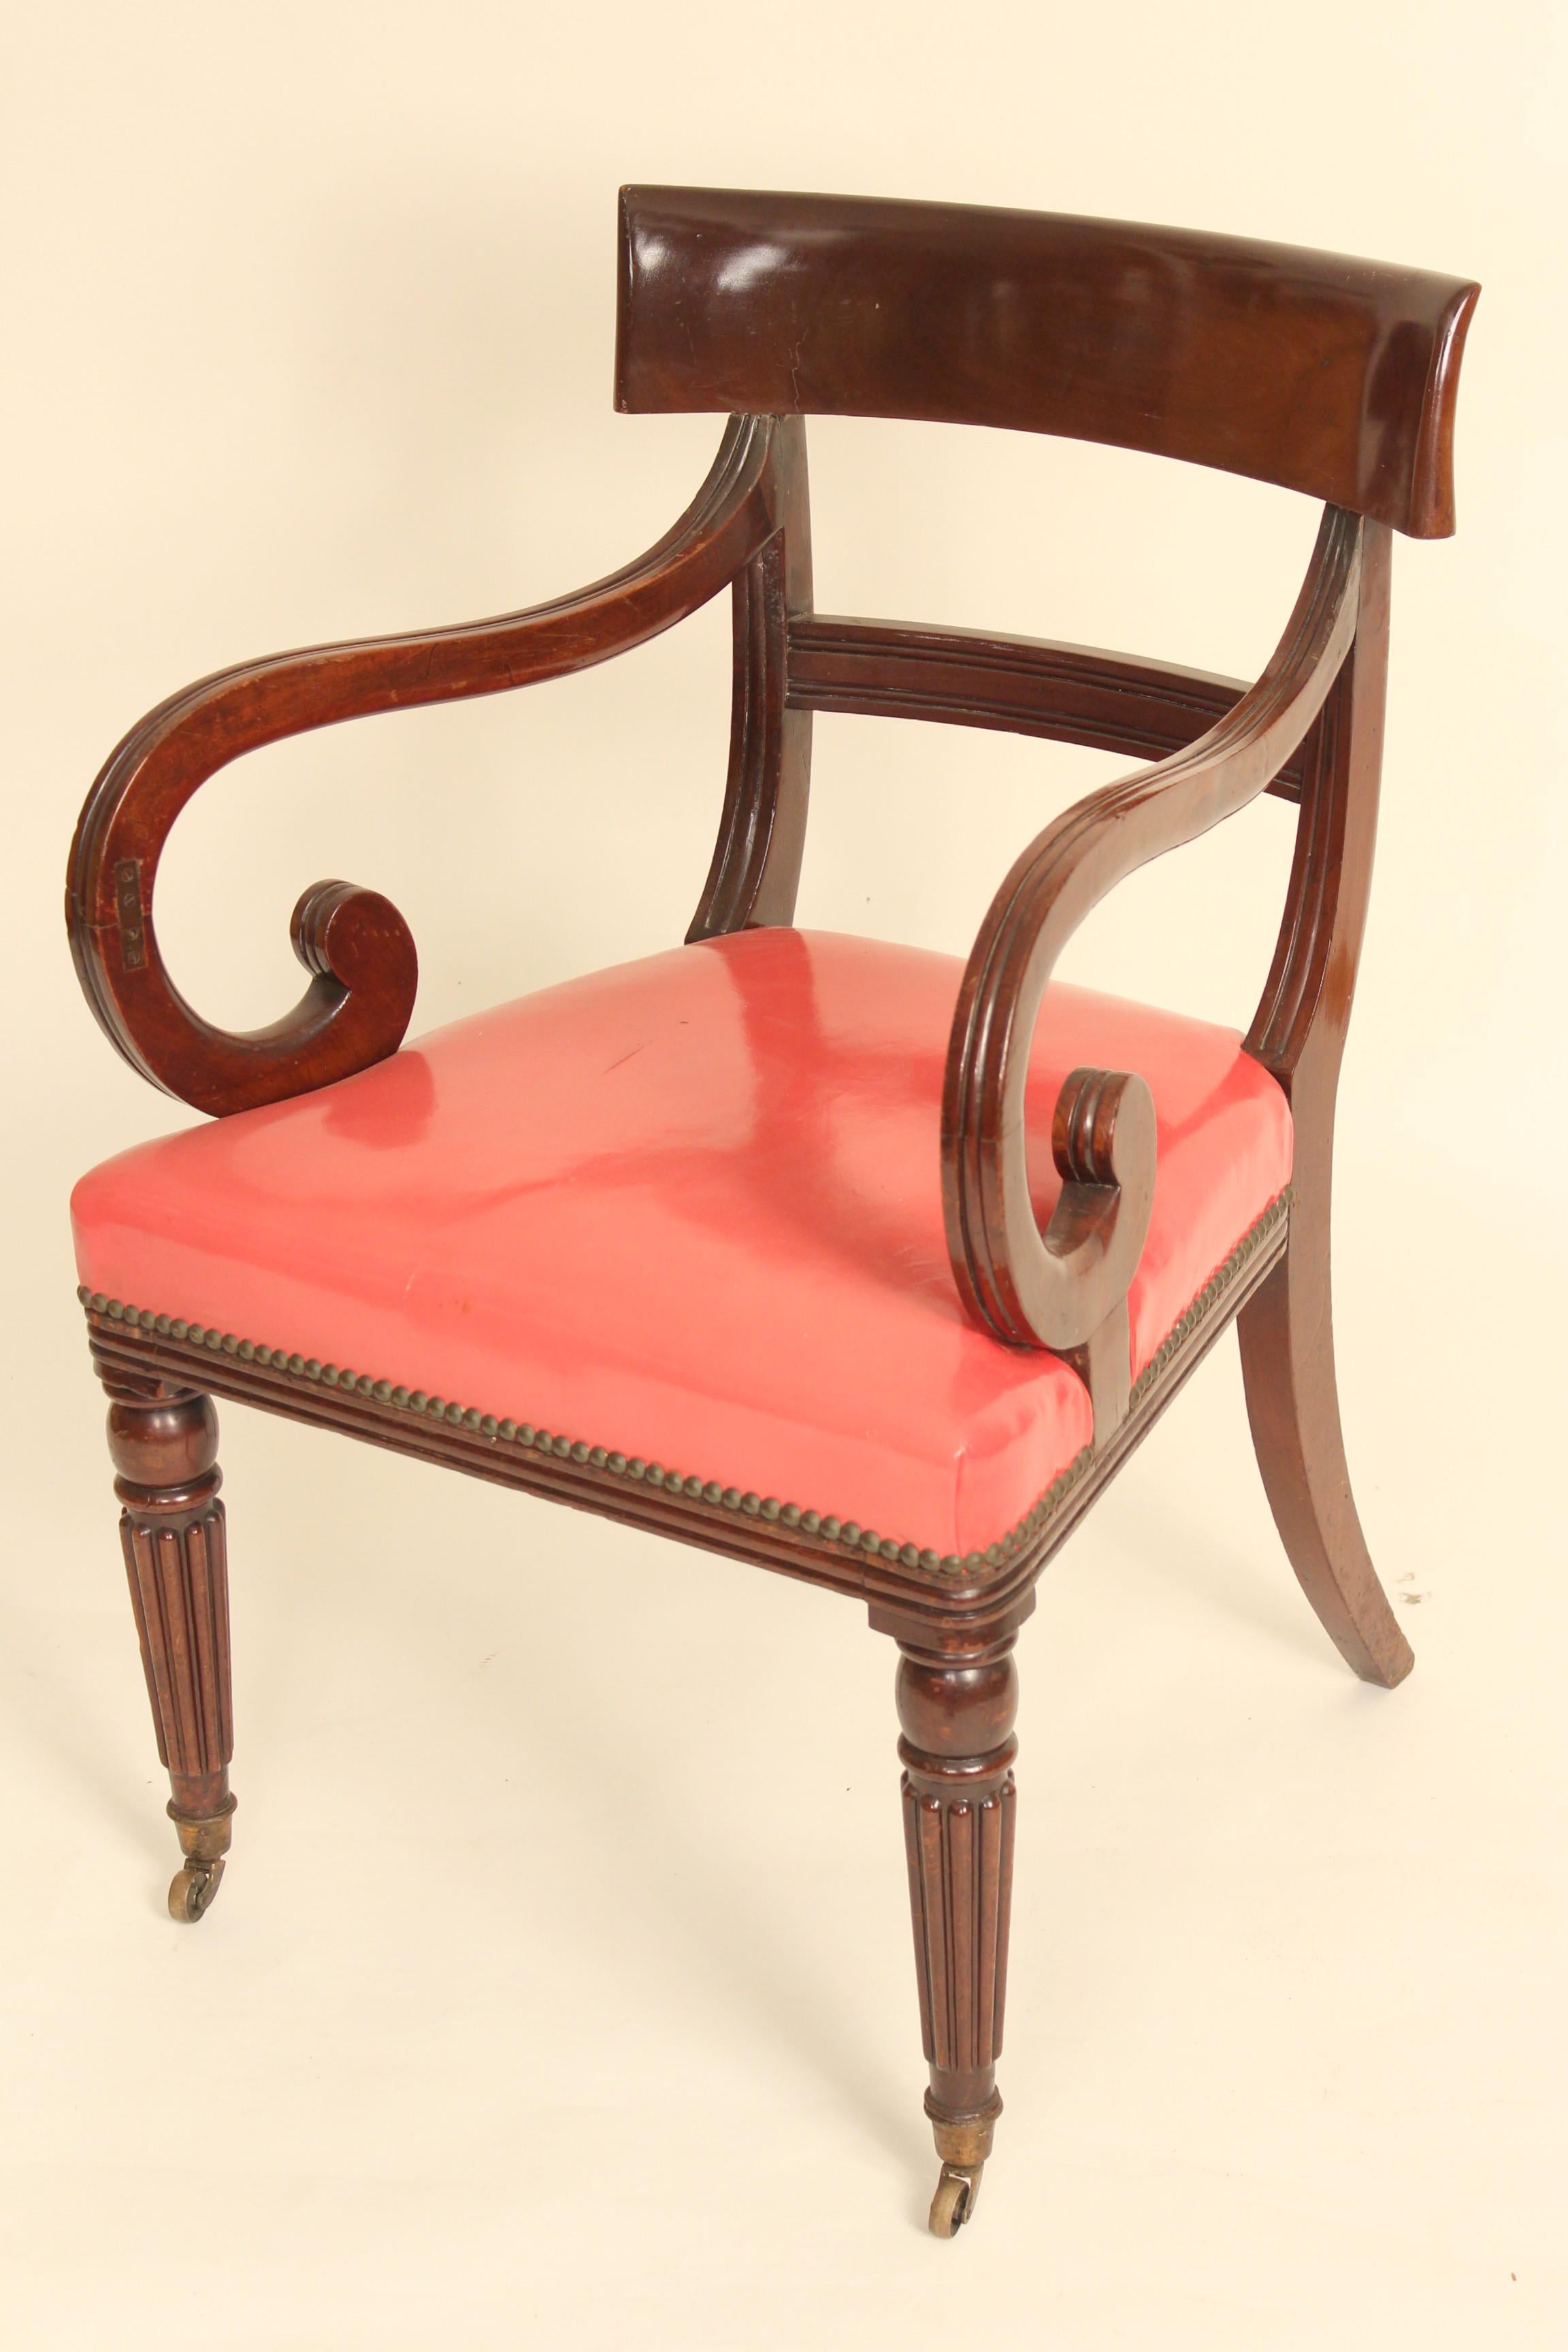 Pair of William IV mahogany armchairs with vinyl seats, the frames circa 1840 the seats, 20th century.